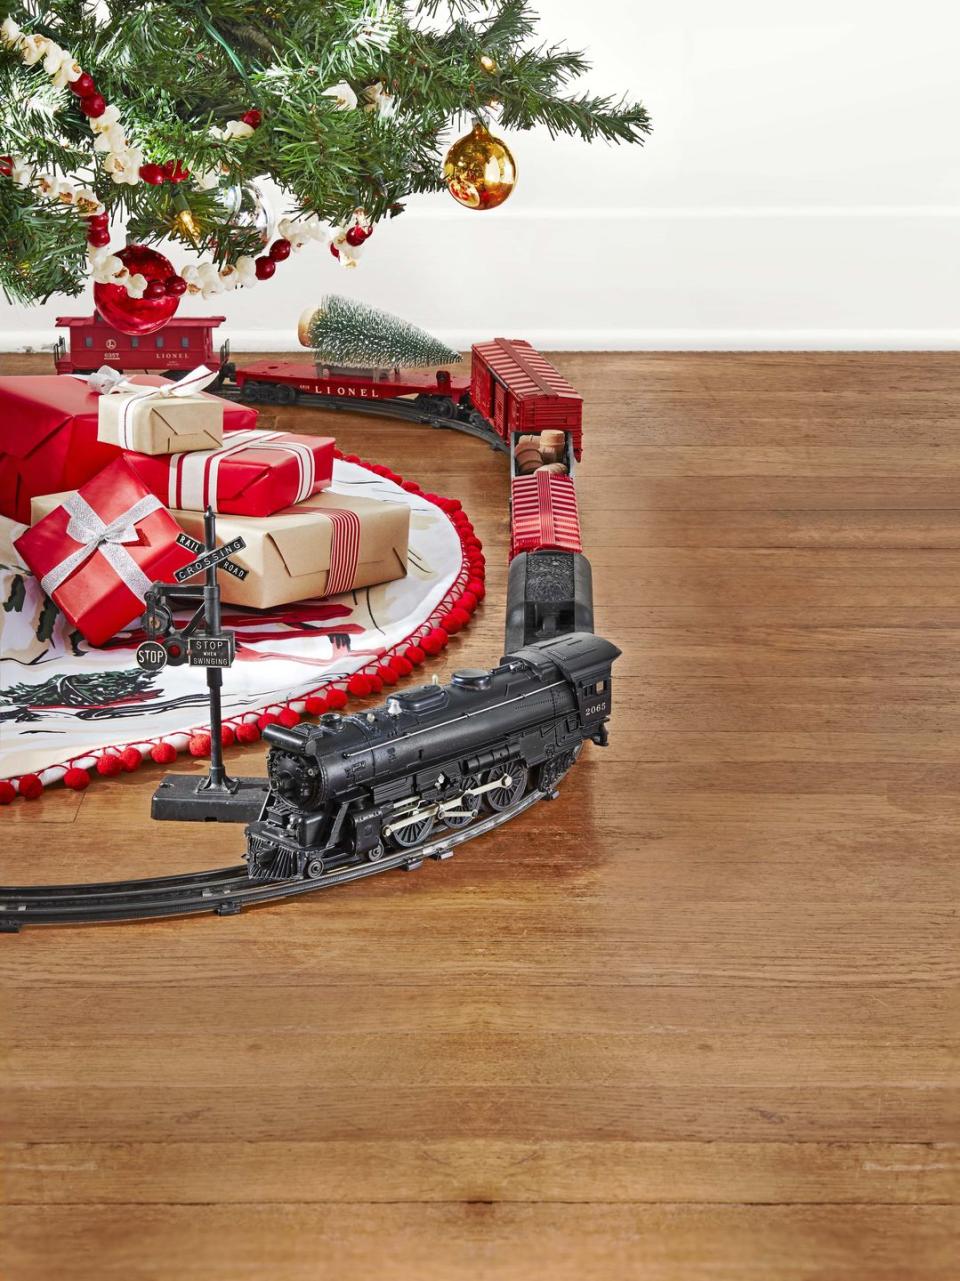 <p>Young inventor Joshua Lionel Cowen launched his then-New York City-based Lionel Manufacturing Co. in 1900 with a standard gauge electric locomotive. After World War II, Lionel expanded its O-gauge steam locomotive offerings, including a series of "O27" gauge train sets, like the one pictured here. Priced as low as $19.95, the starter sets had plenty of tempting add-on cars and accessories that could be acquired year after year. </p><p><strong>What it's worth:</strong> Up to $500</p>